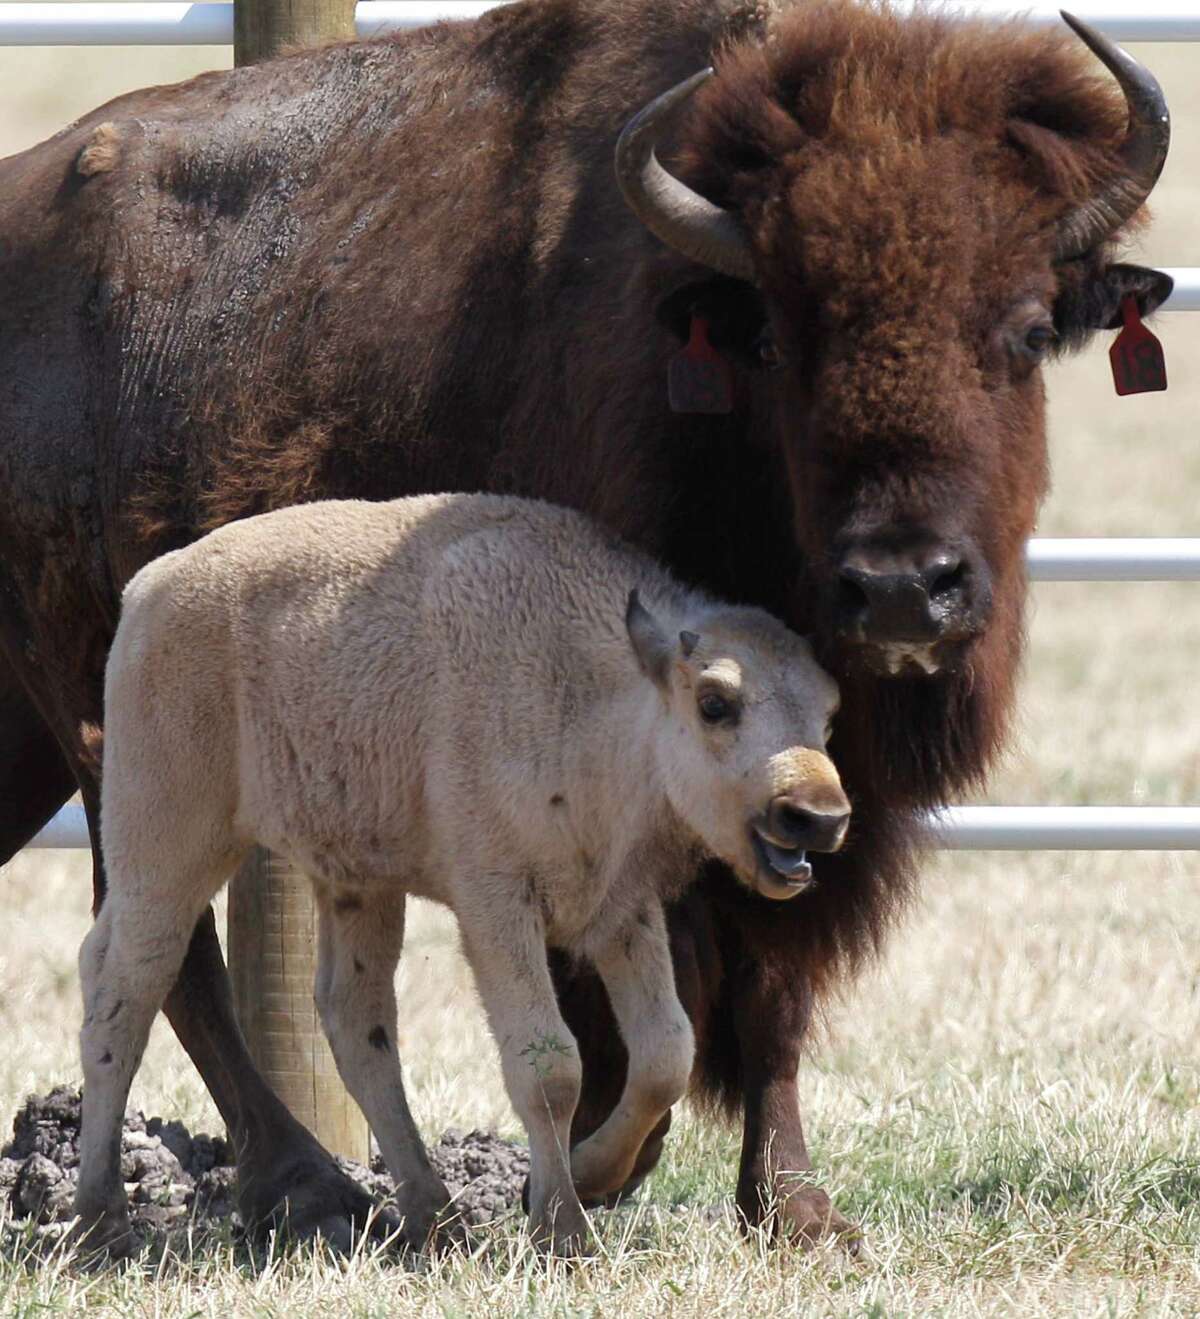 Lightning Medicine Cloud, a rare white buffalo calf, died in May on a ranch near Greenville.